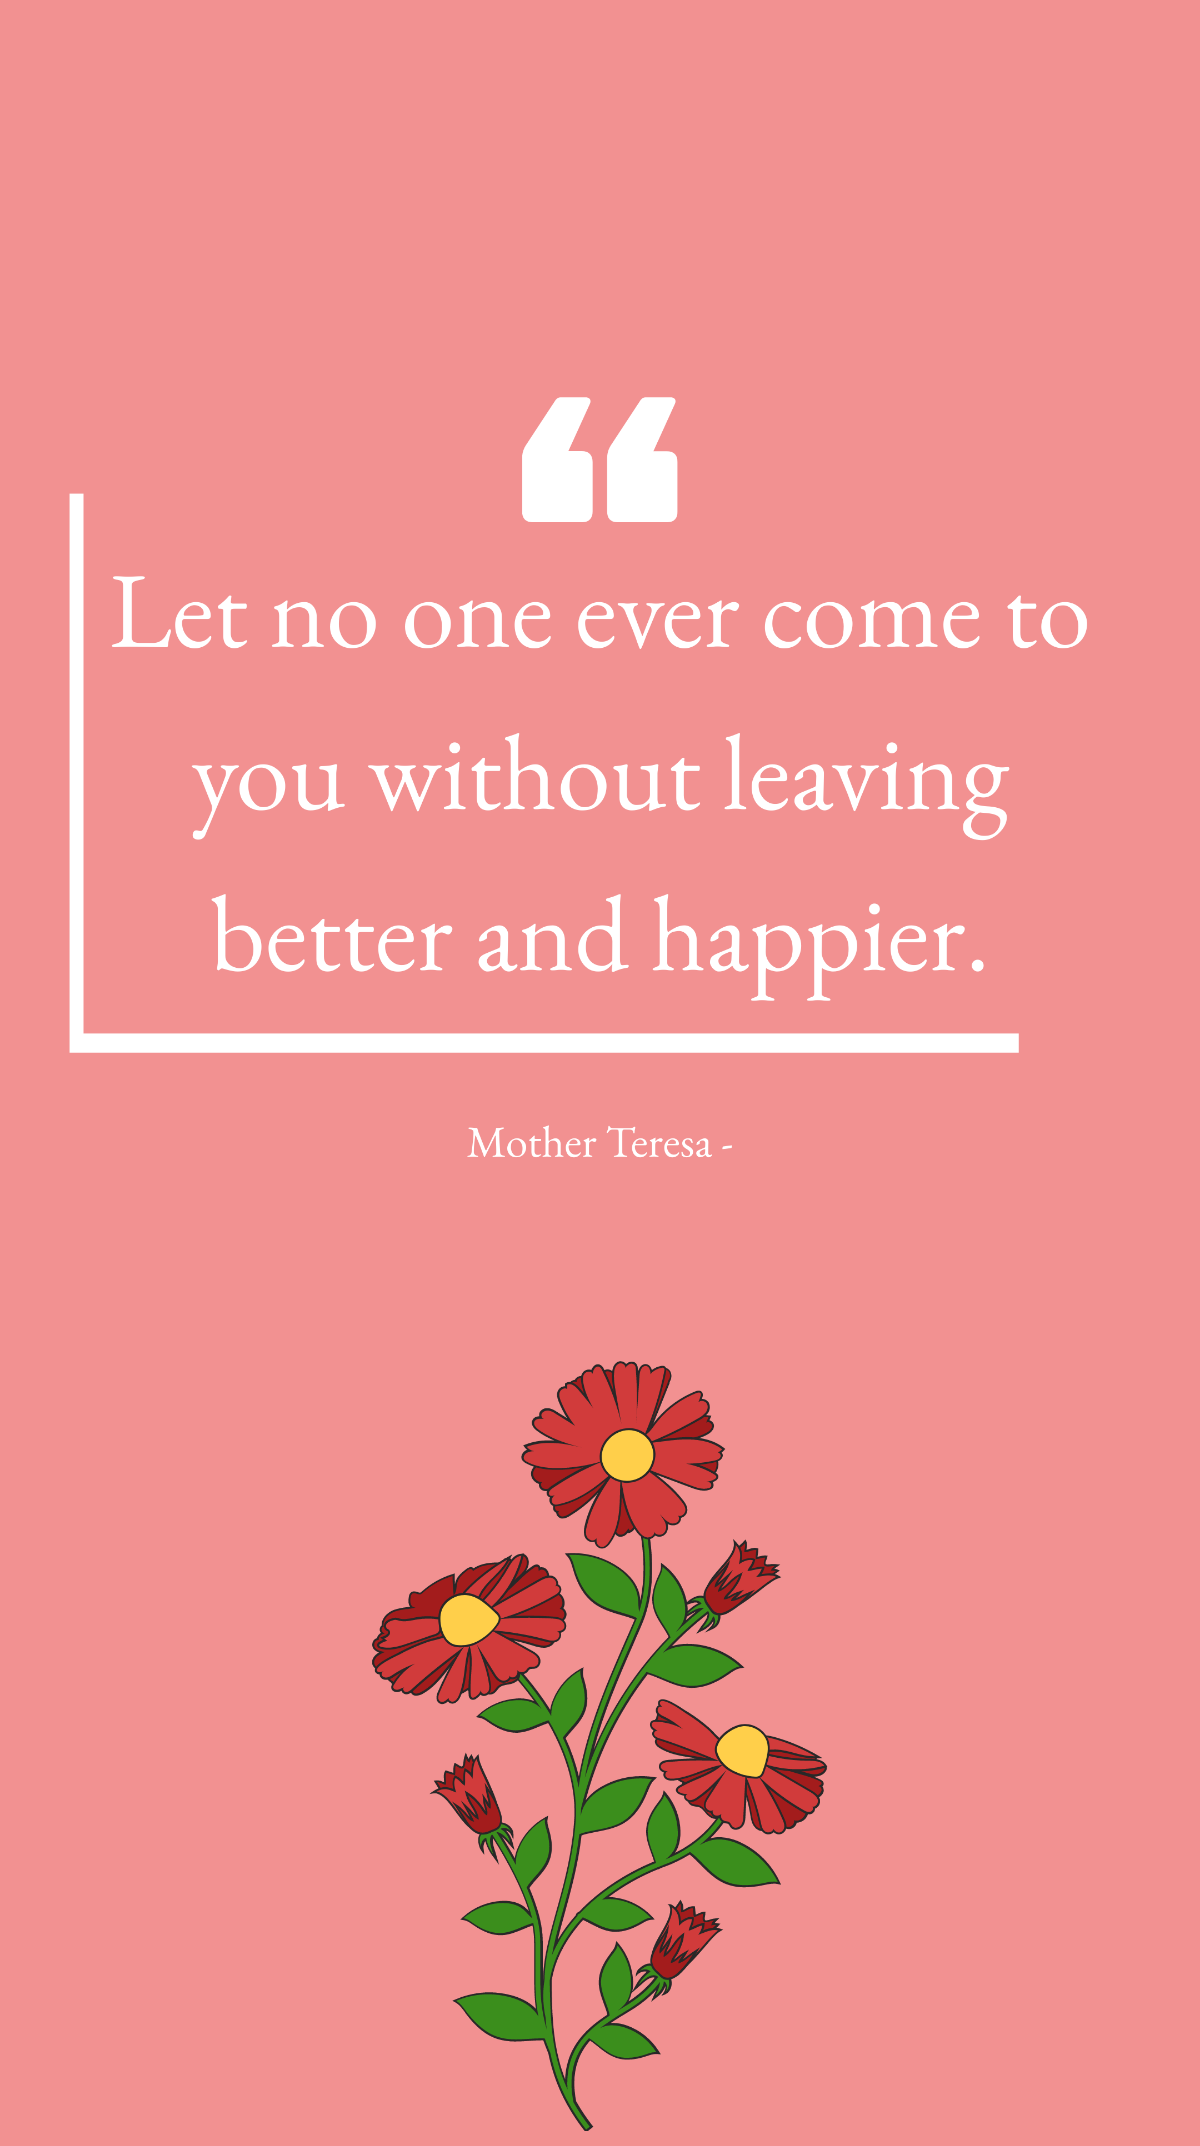 Mother Teresa - Let no one ever come to you without leaving better and happier. Template